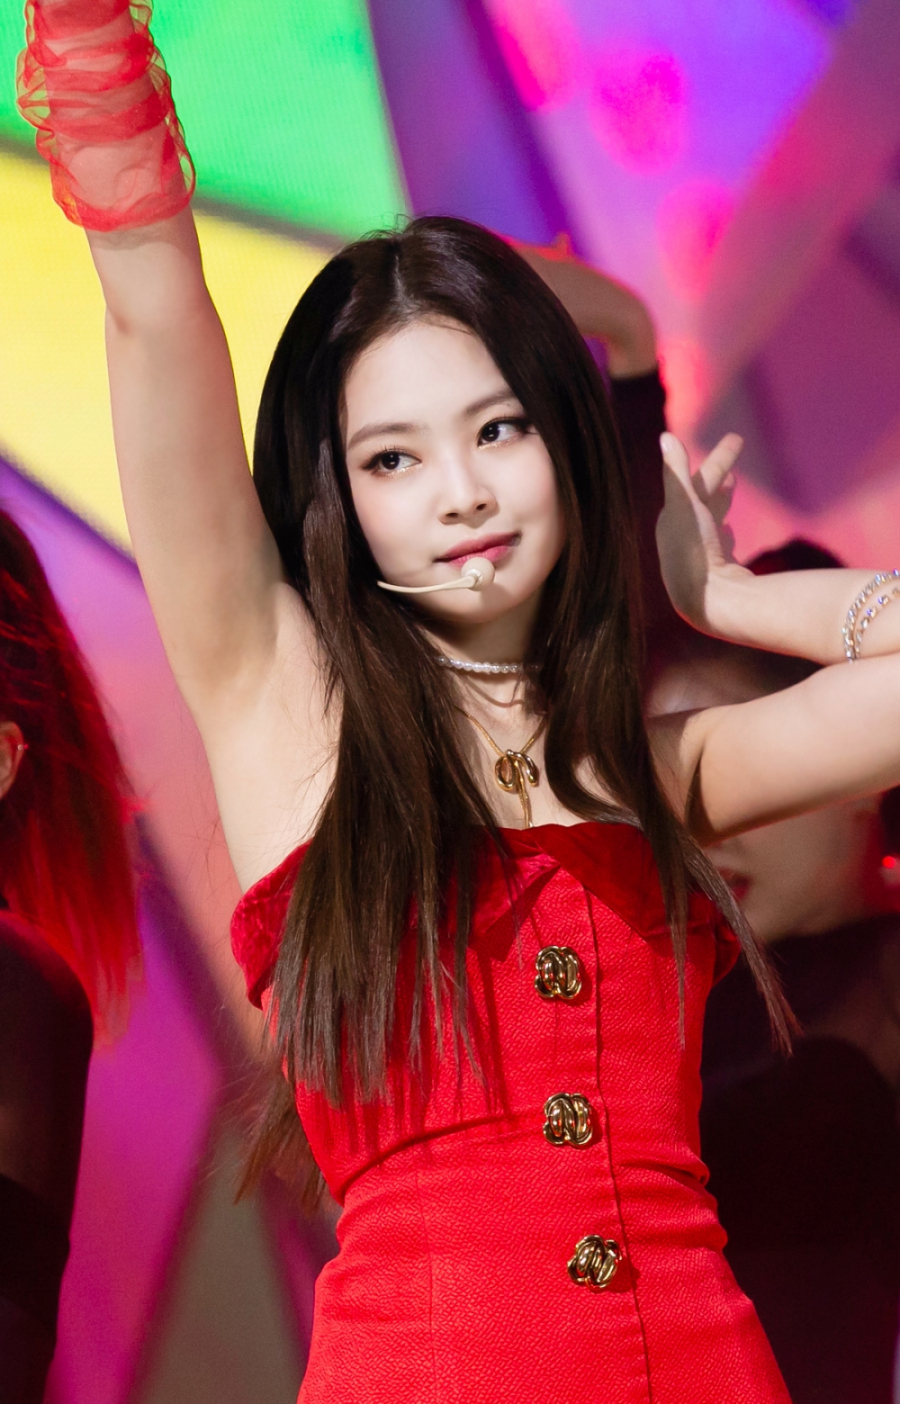 181125-sbs-inkigayo-pd-note-jennie-solo-official-hq-no-logo-8-16321090840712032626035